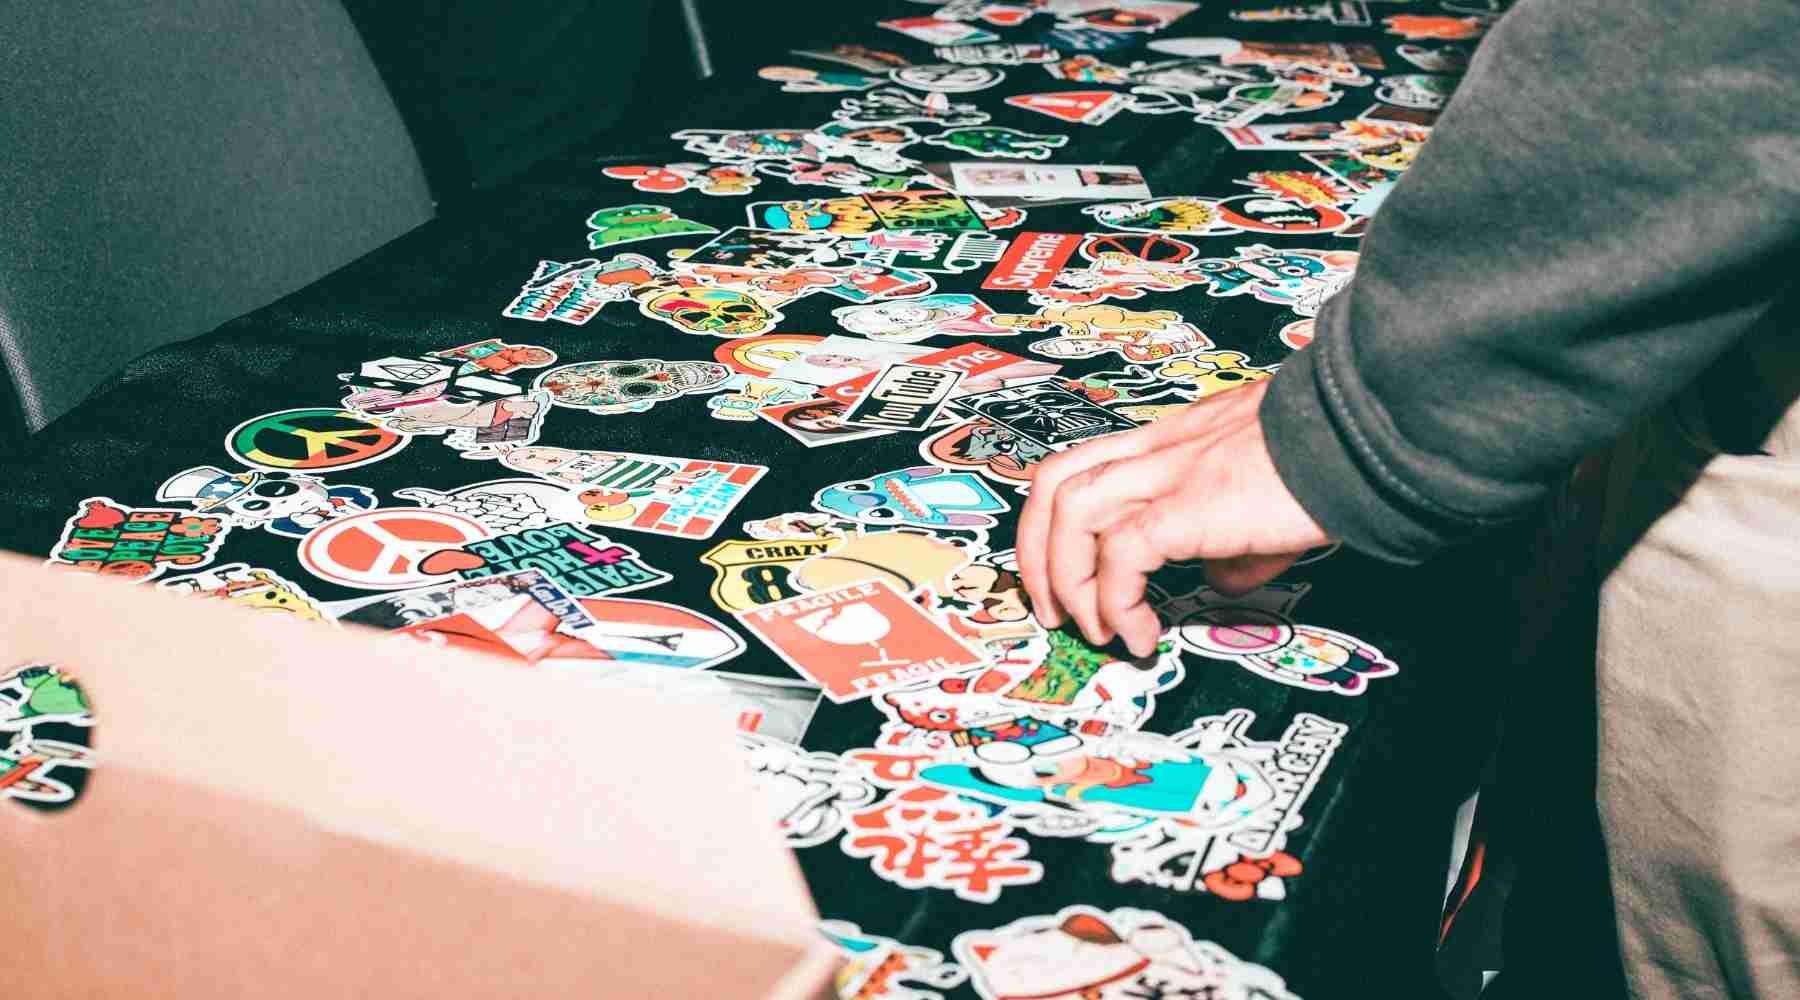 How to Make Stickers to Sell